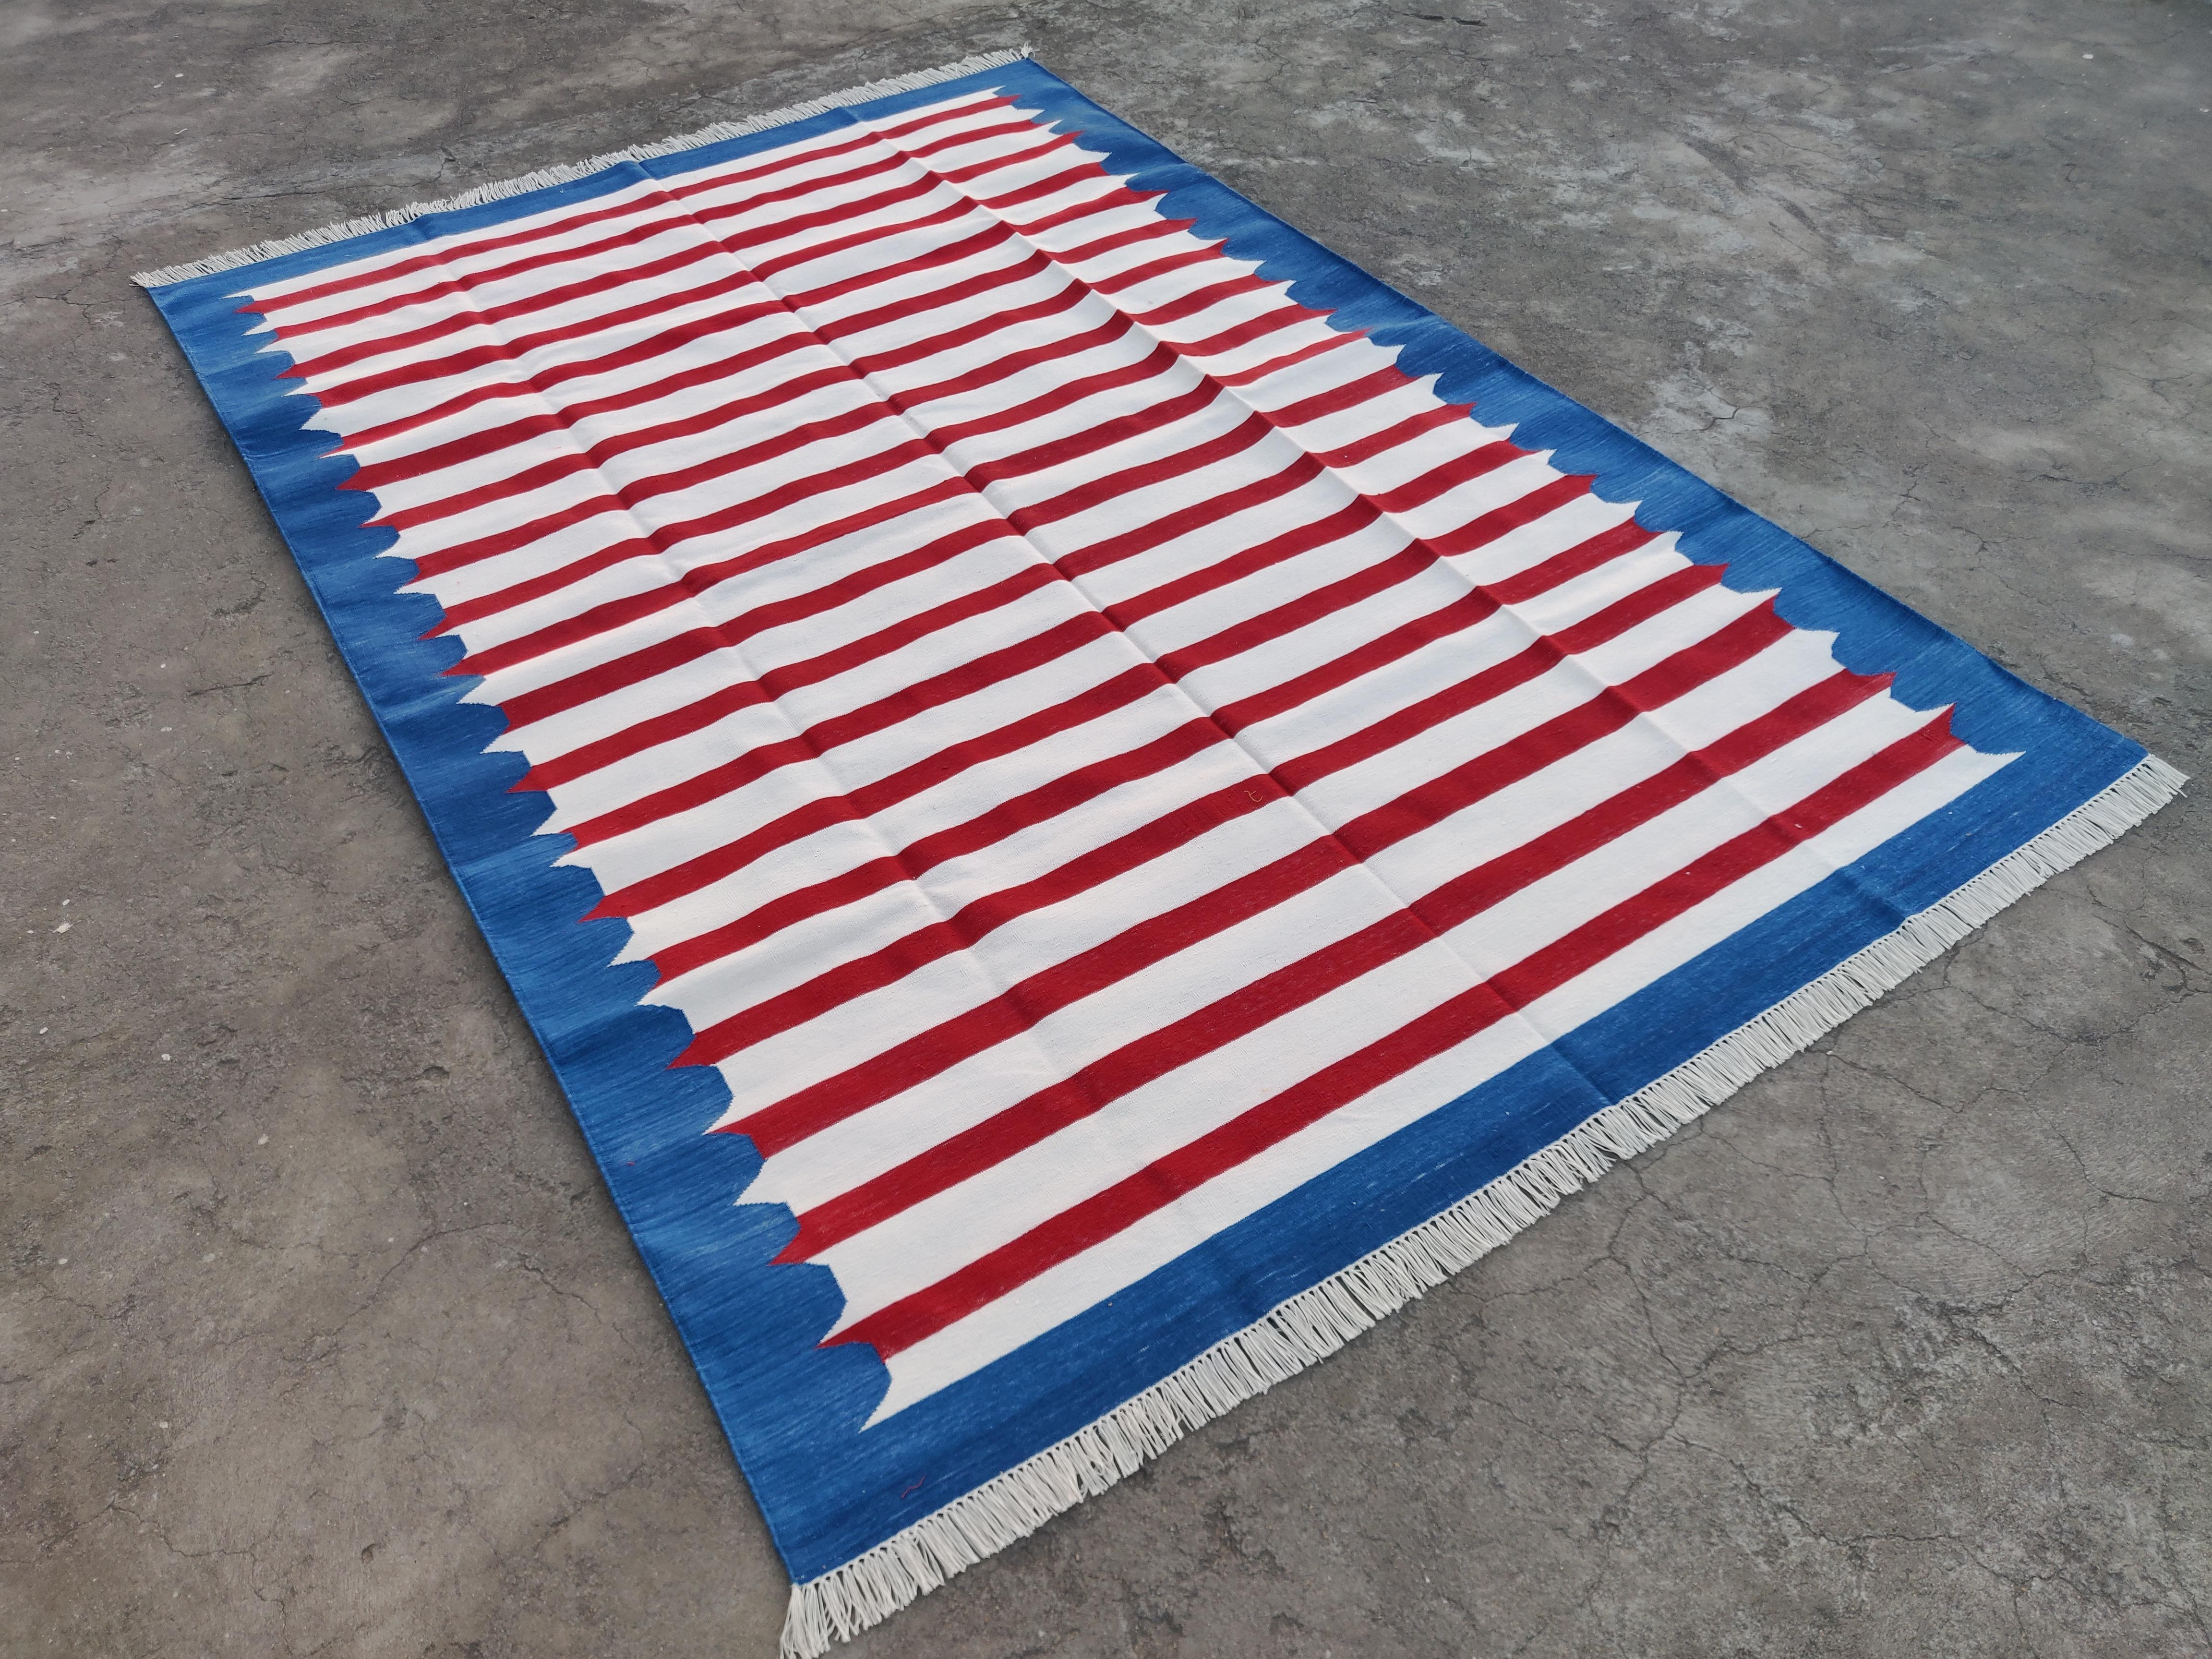 Cotton Vegetable Dyed Indigo Blue and Red Striped Scalloped Indian Dhurrie Rug-6'x9' 

These special flat-weave dhurries are hand-woven with 15 ply 100% cotton yarn. Due to the special manufacturing techniques used to create our rugs, the size and